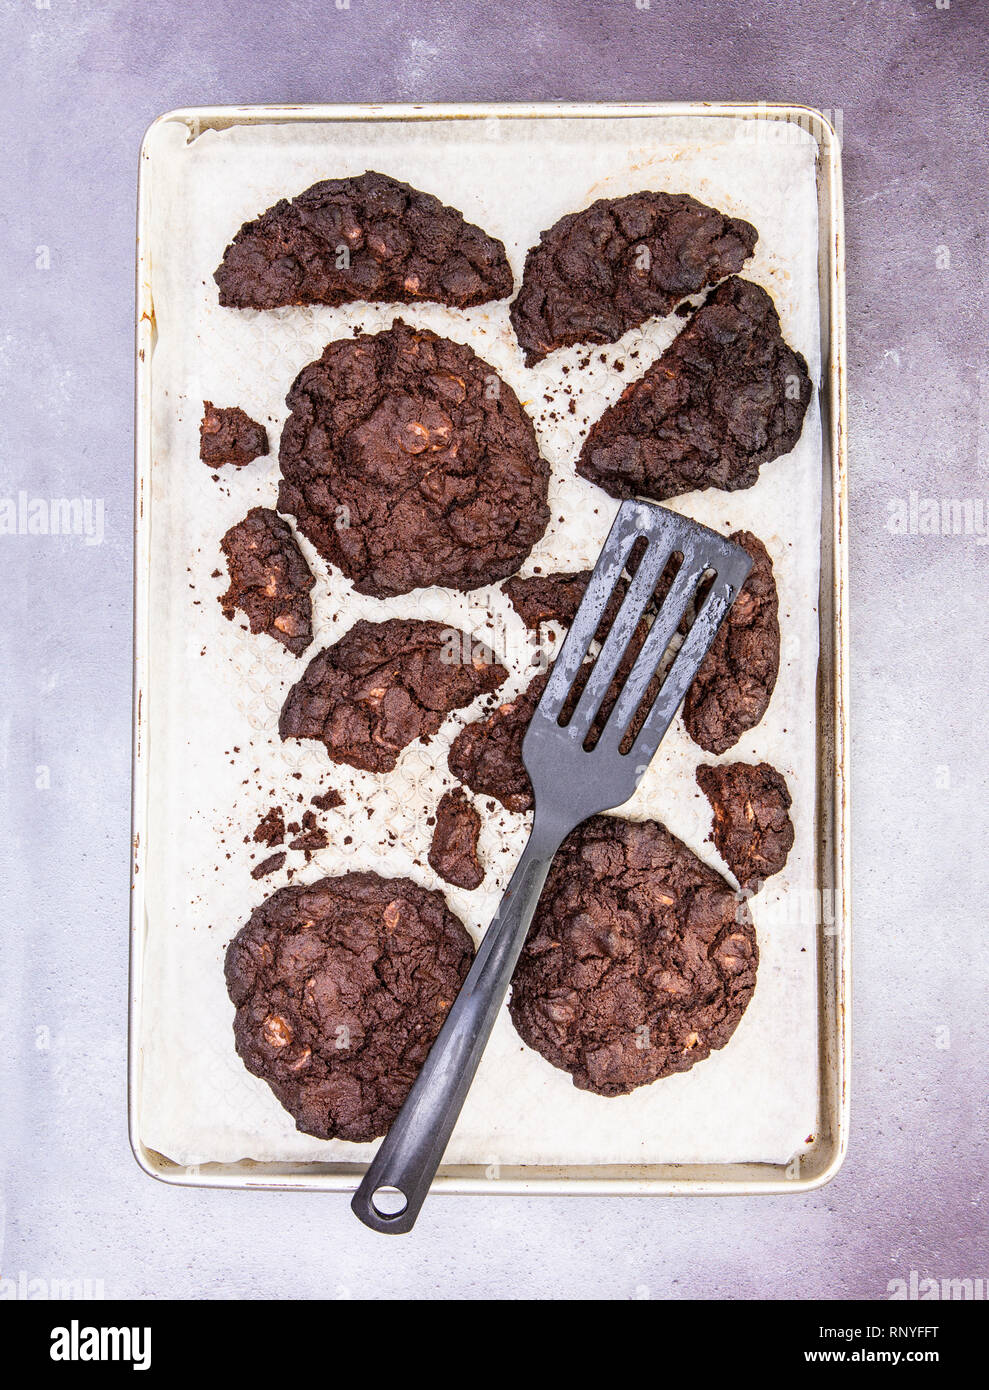 Home Made Chocolate Cookies on a baking tray Stock Photo